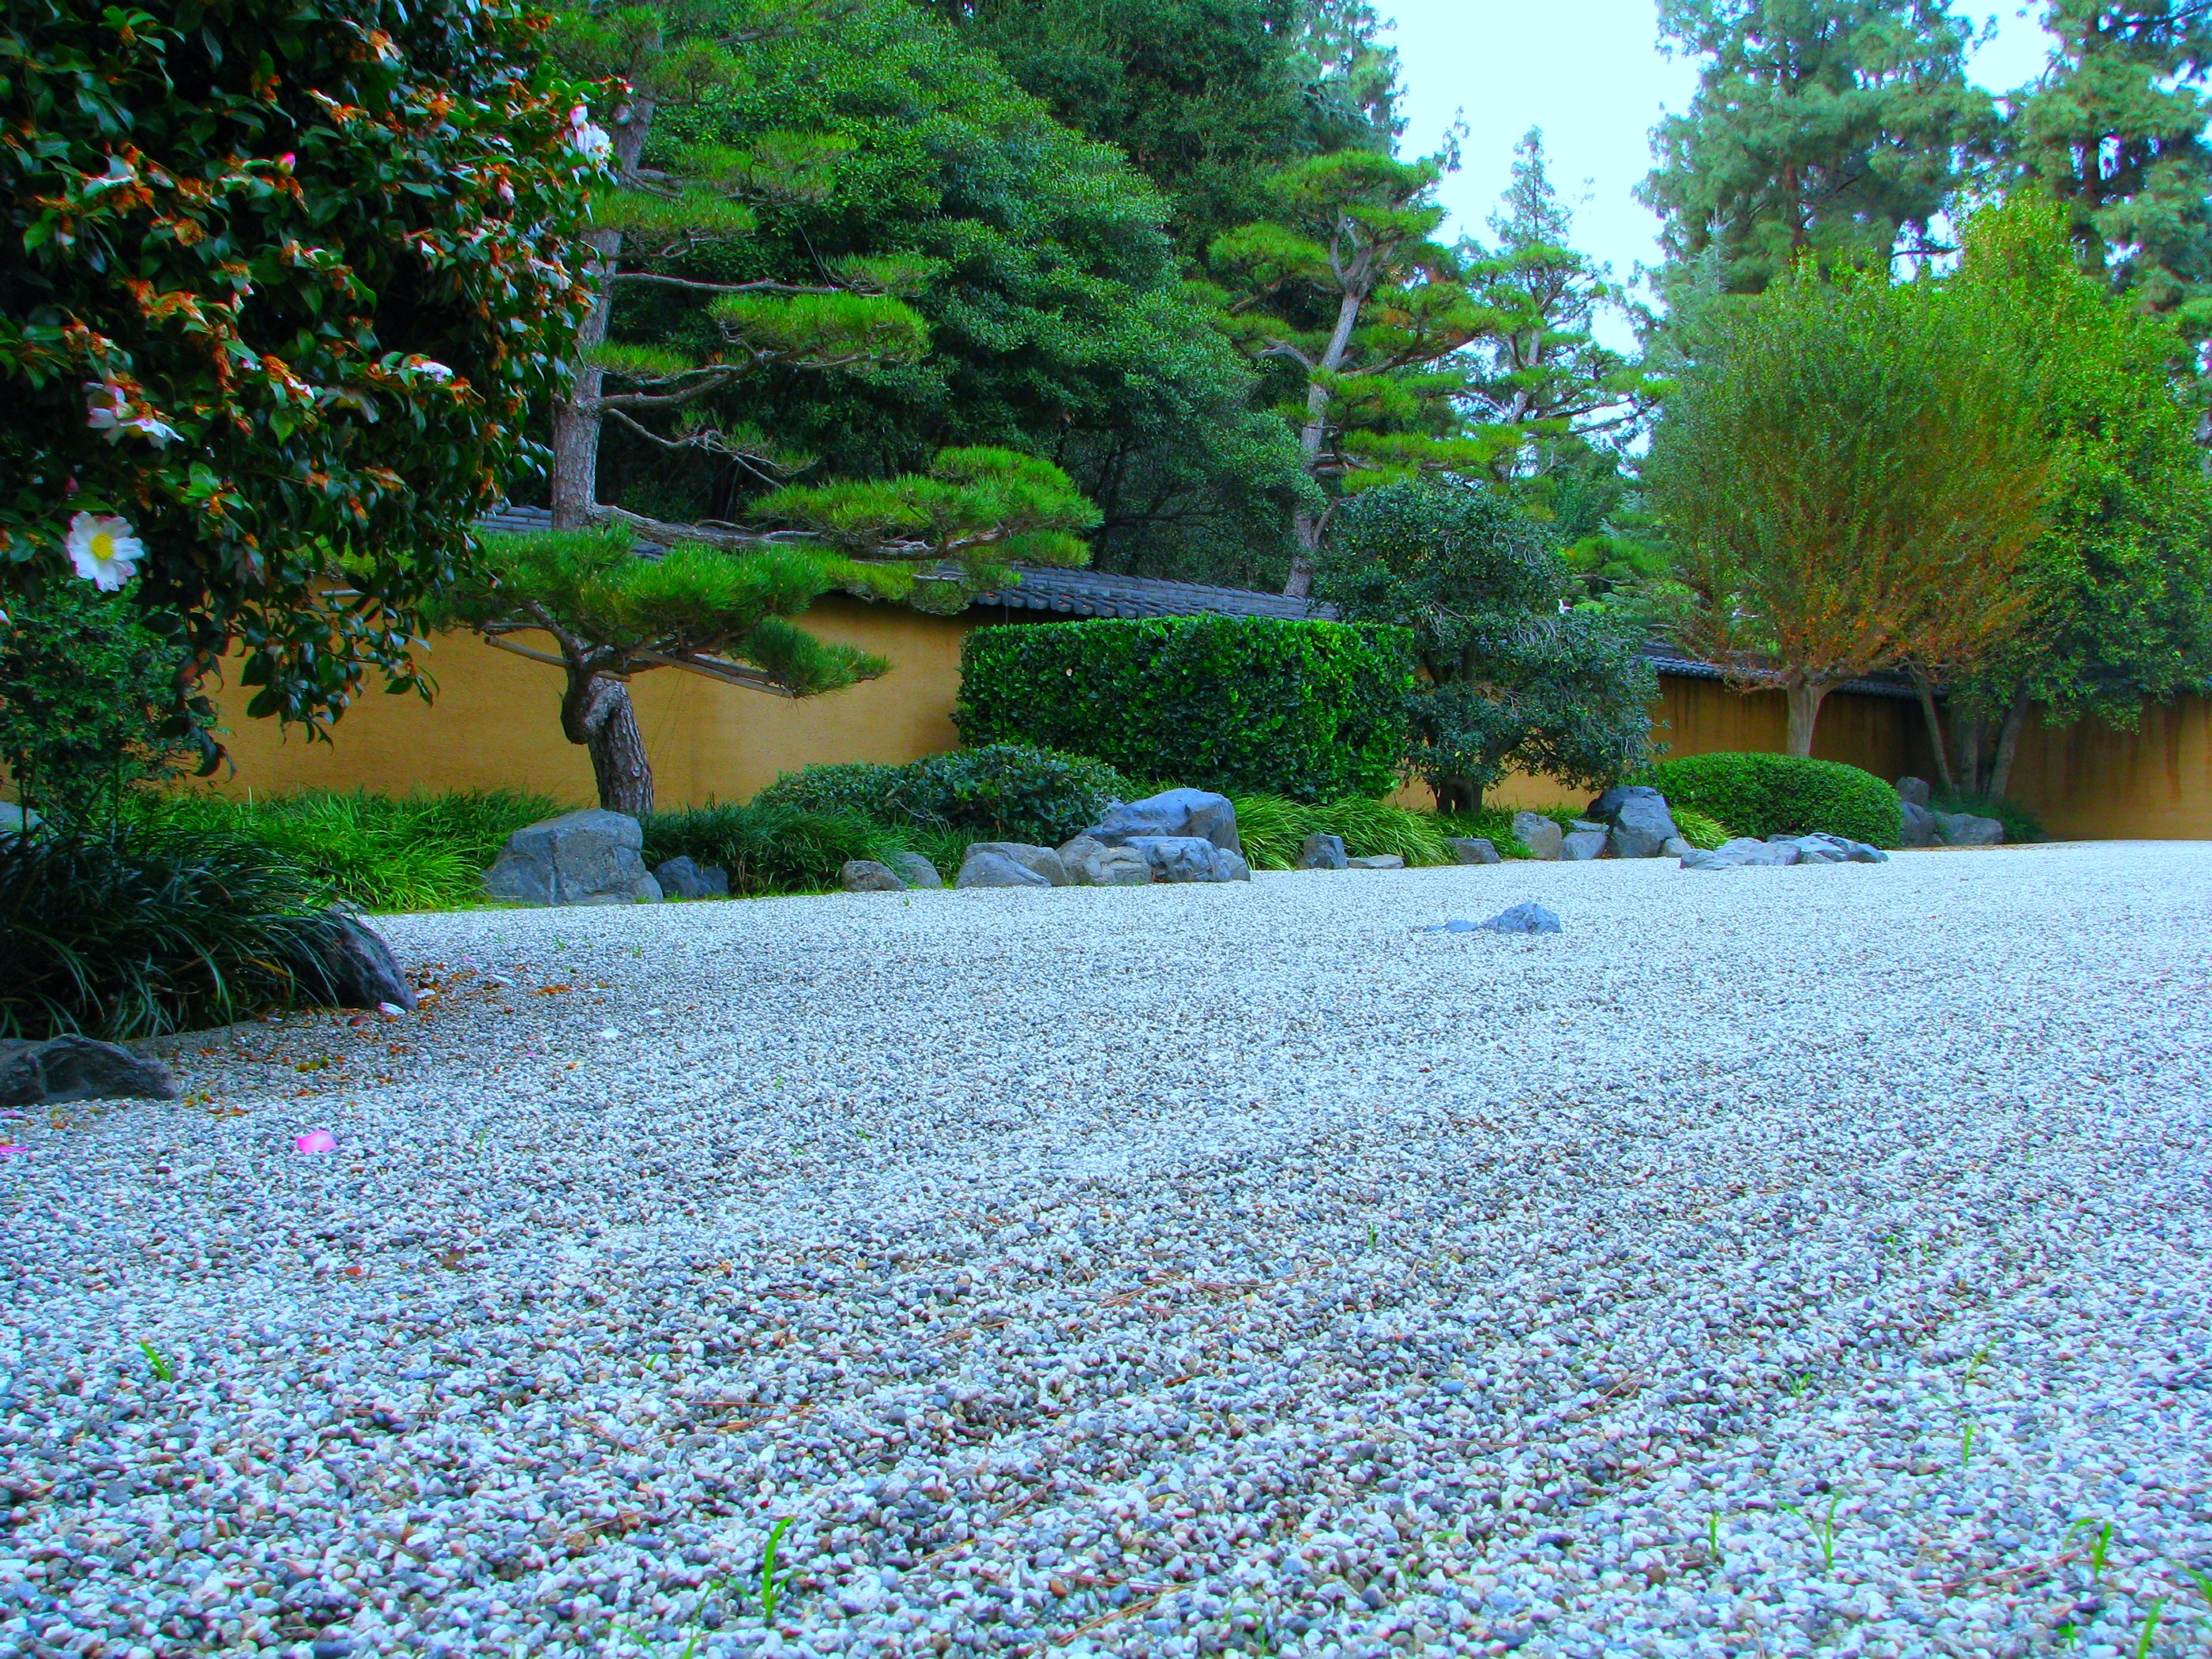 Zen garden with changing leaves